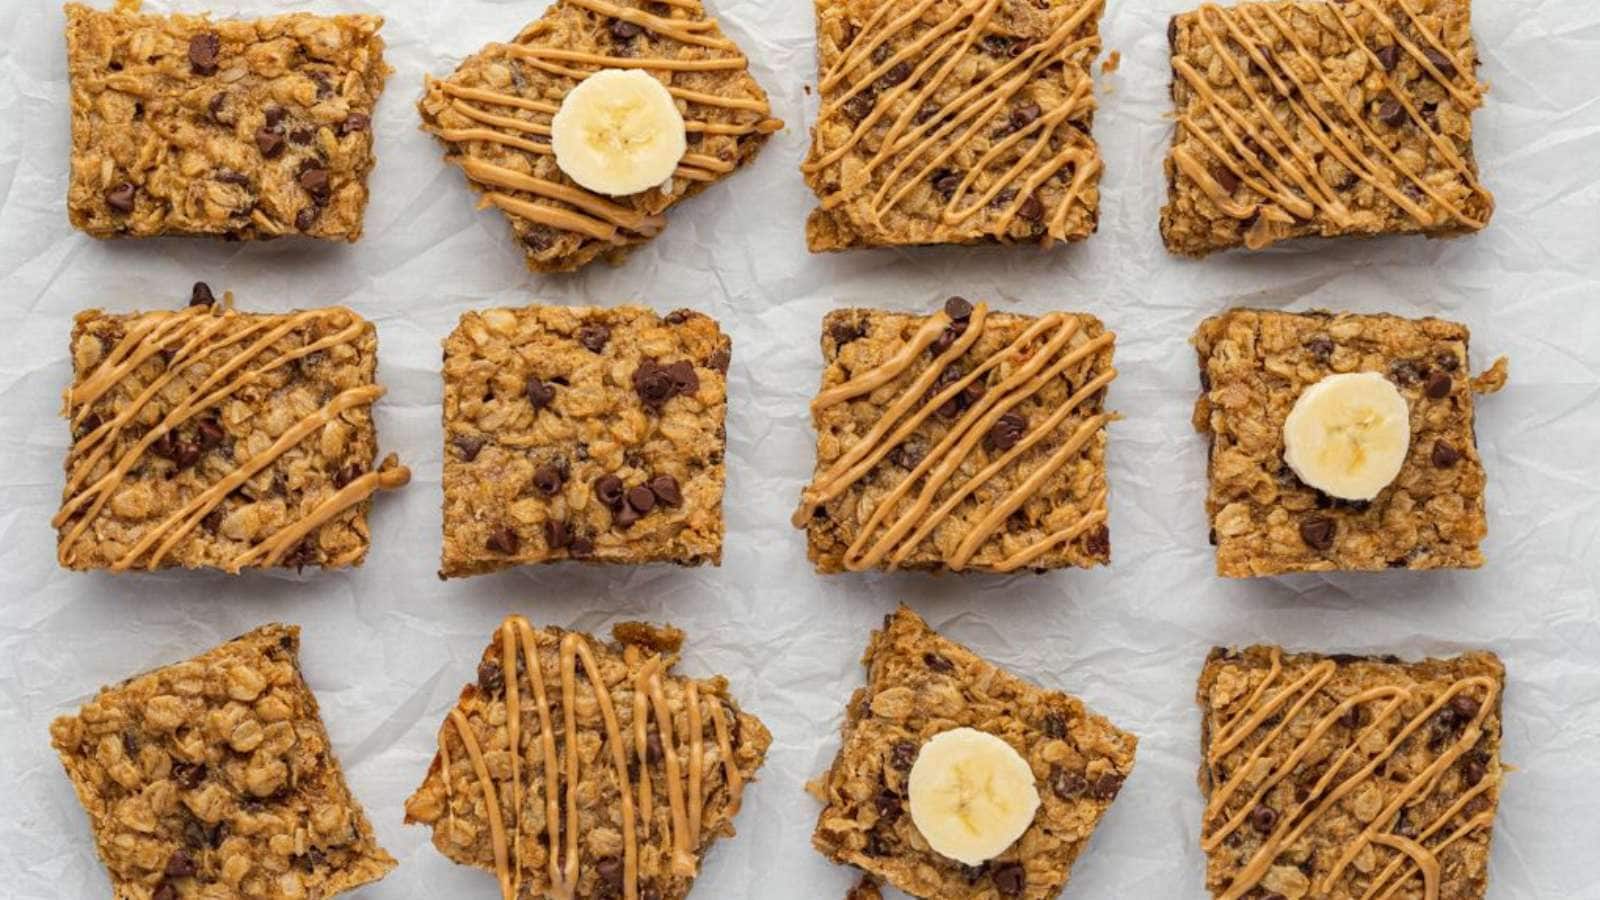 Peanut Butter Banana Oatmeal Bars recipe by Flavor the Moments.